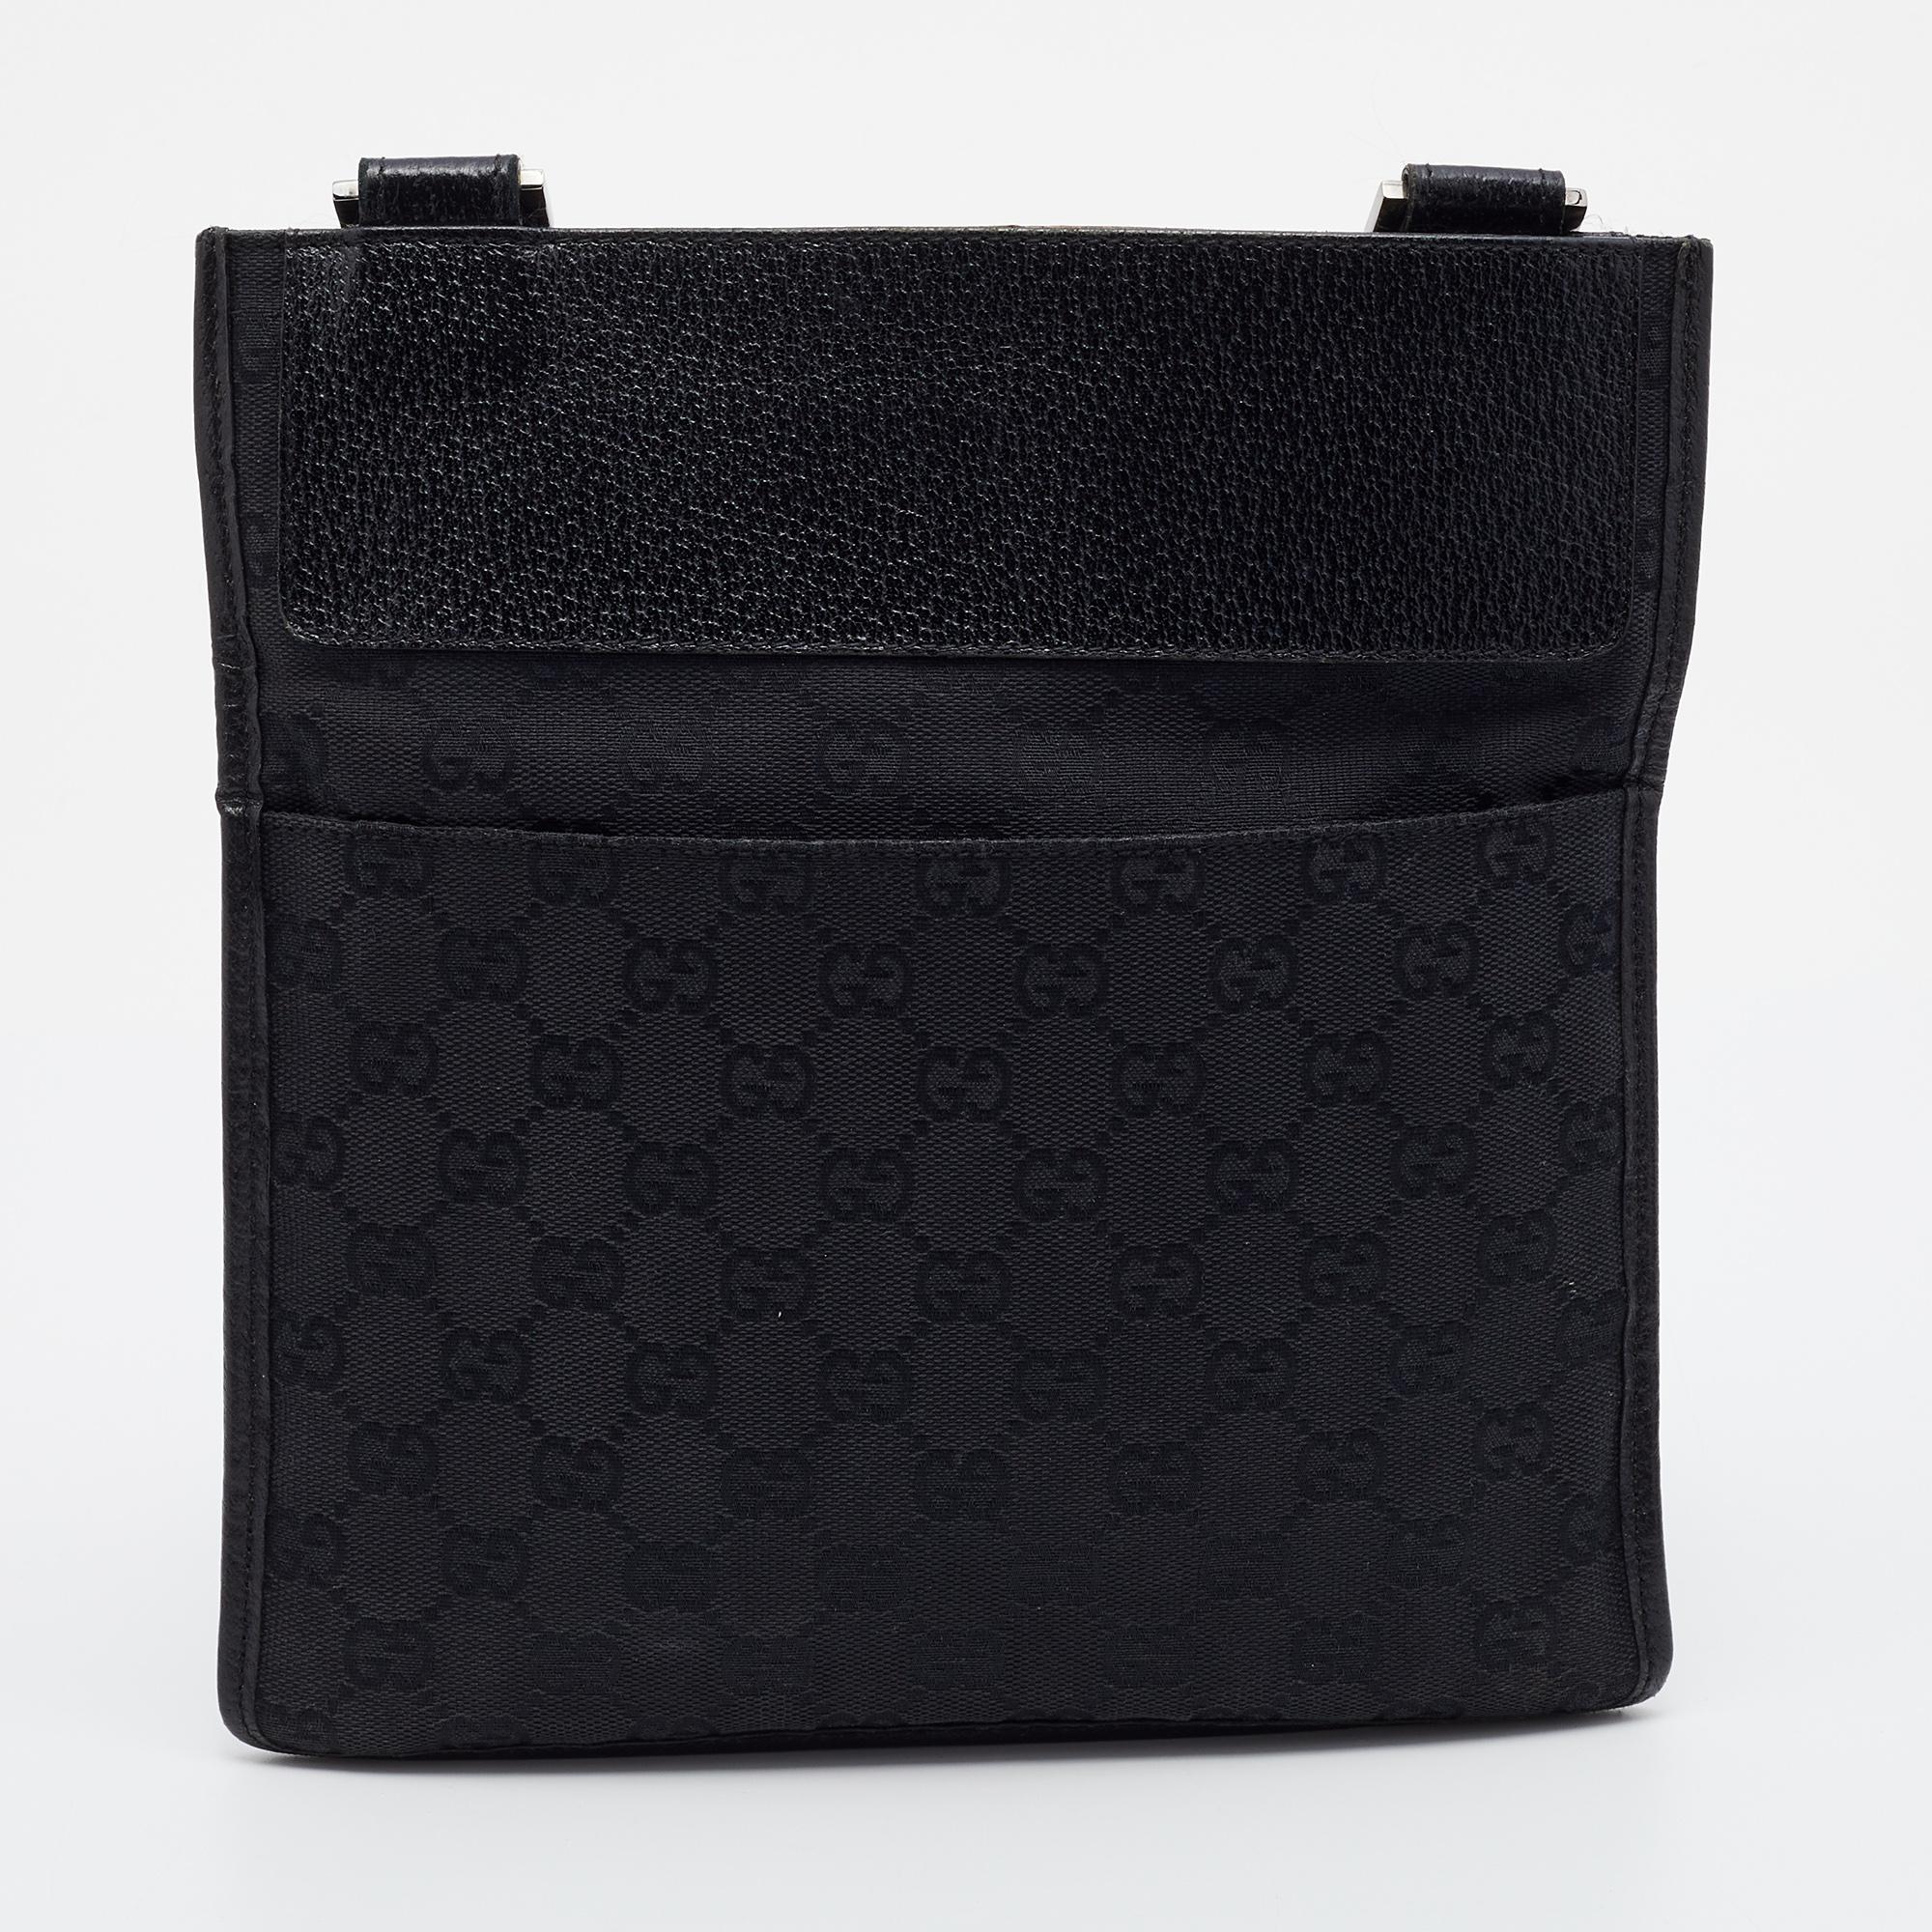 Gucci Black GG Canvas And Leather Flat Messenger Bag 2